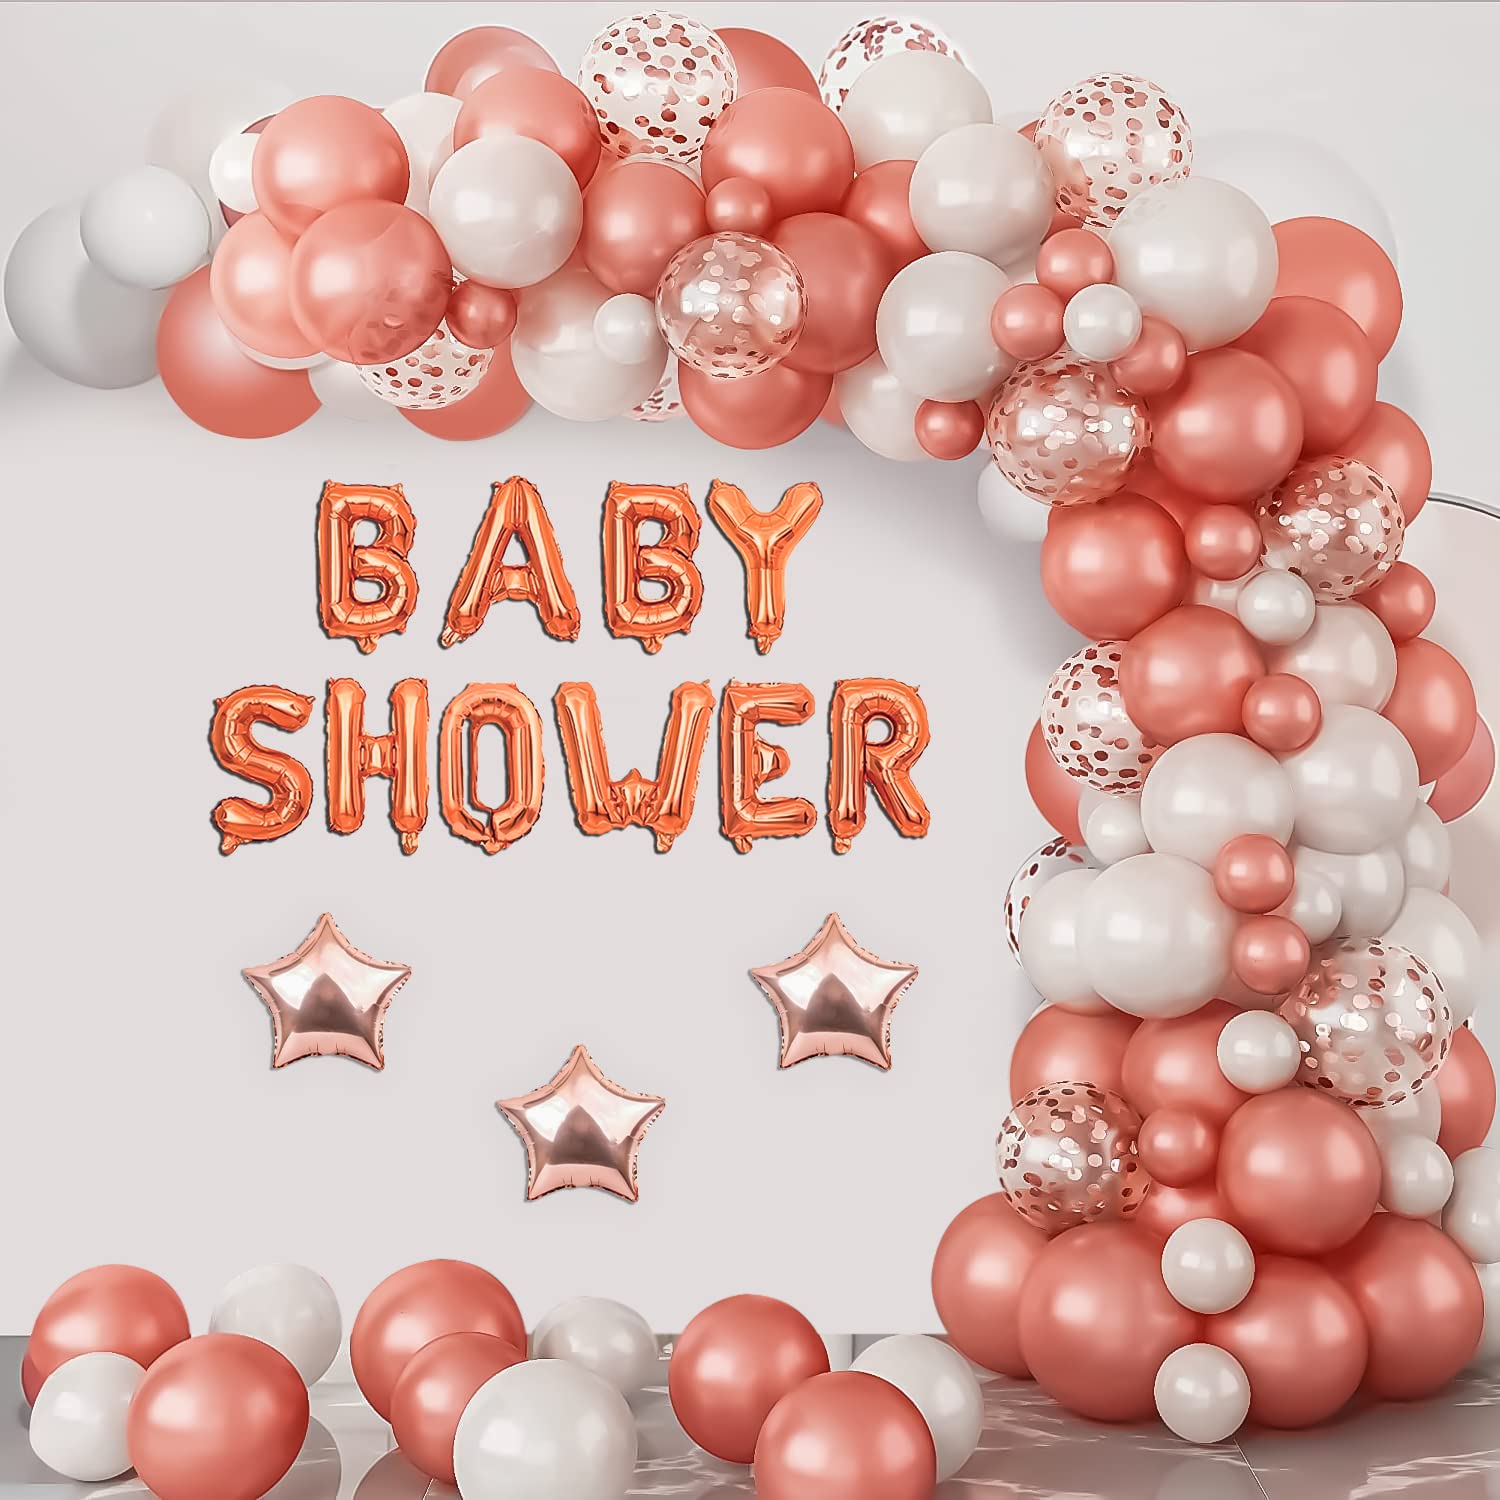 Grand your star with DIY Baby Shower Kit